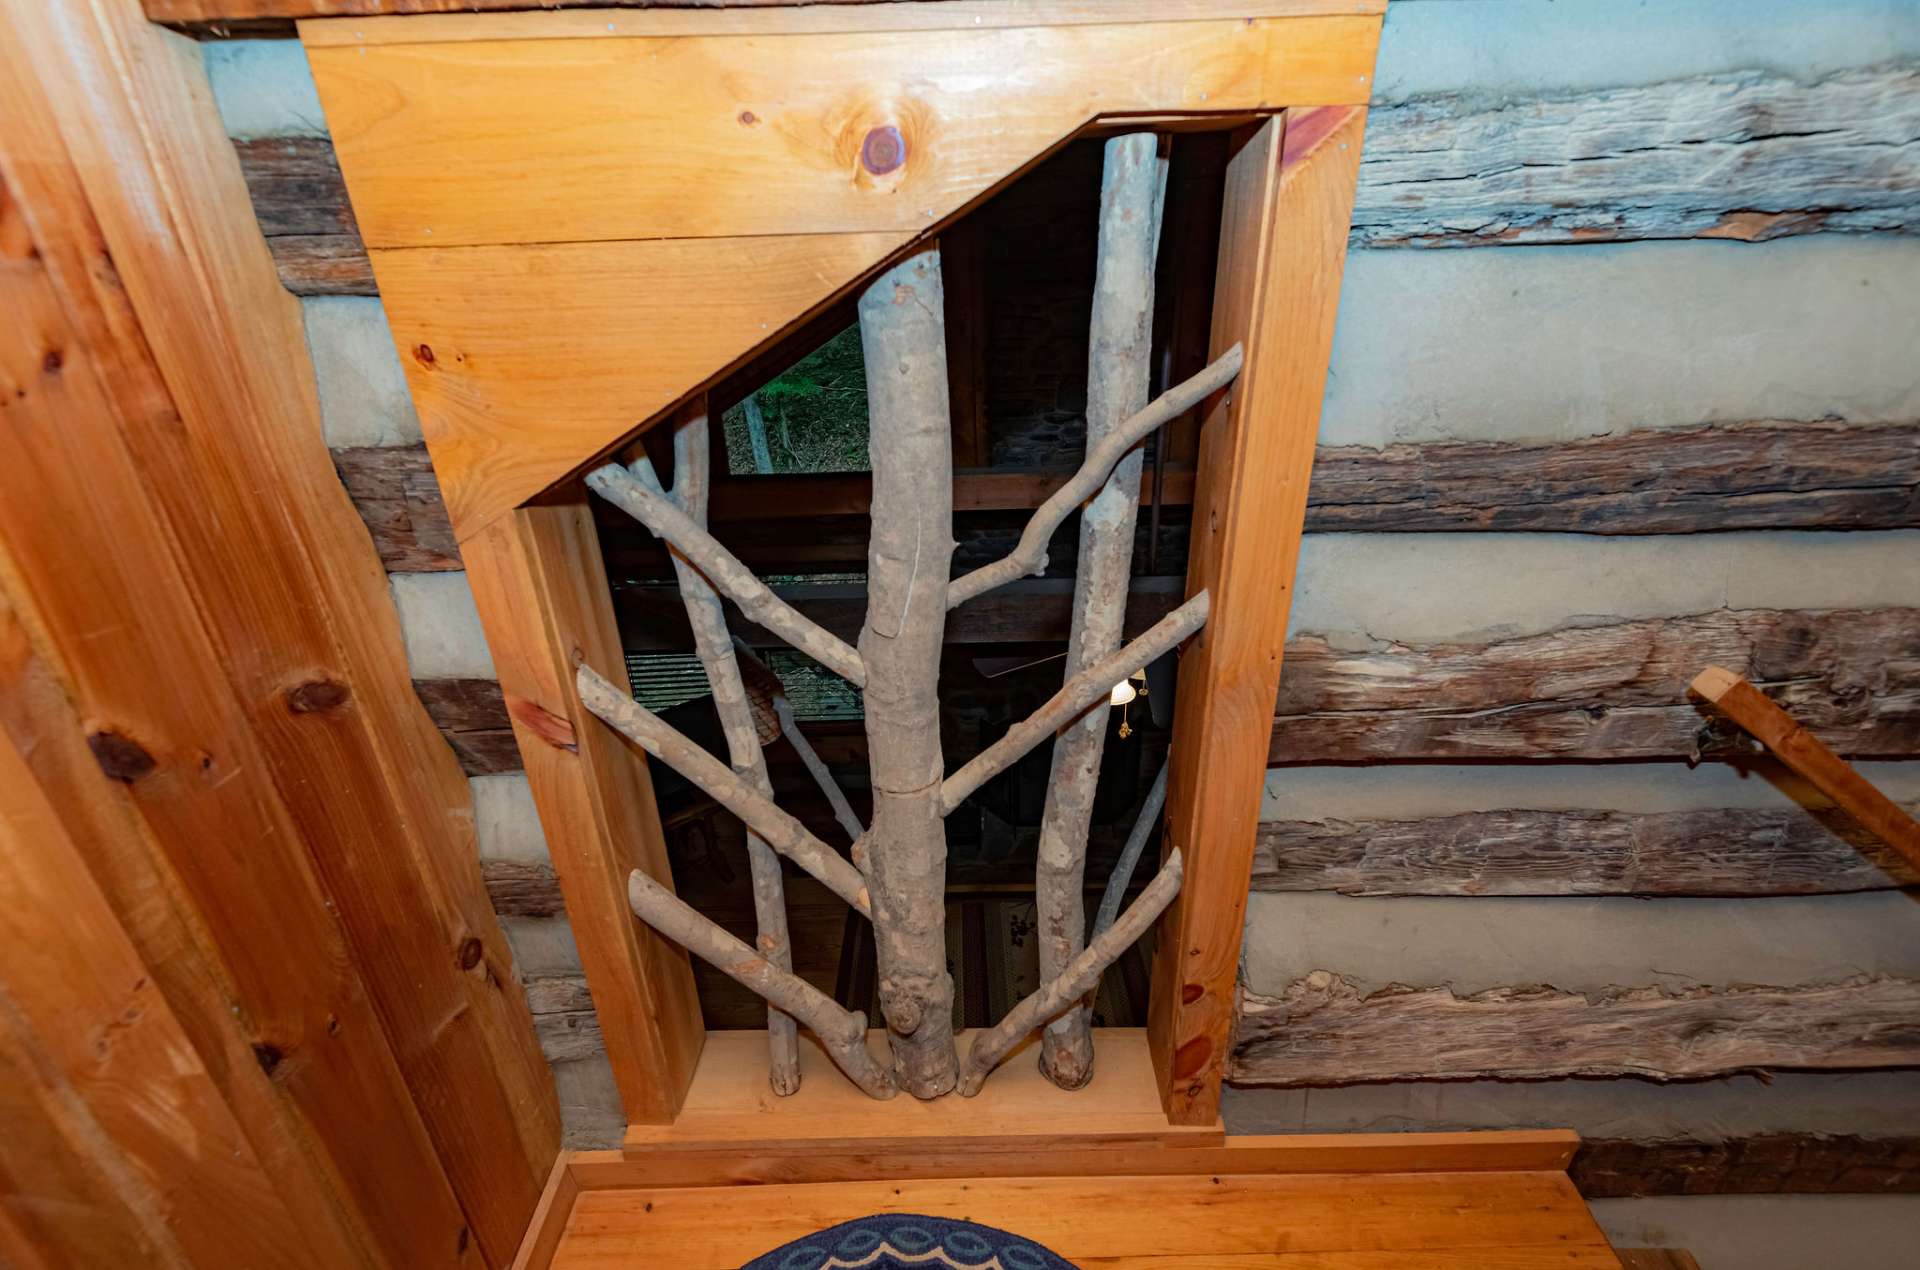 Notice these rustic features that add to the log cabin feel.